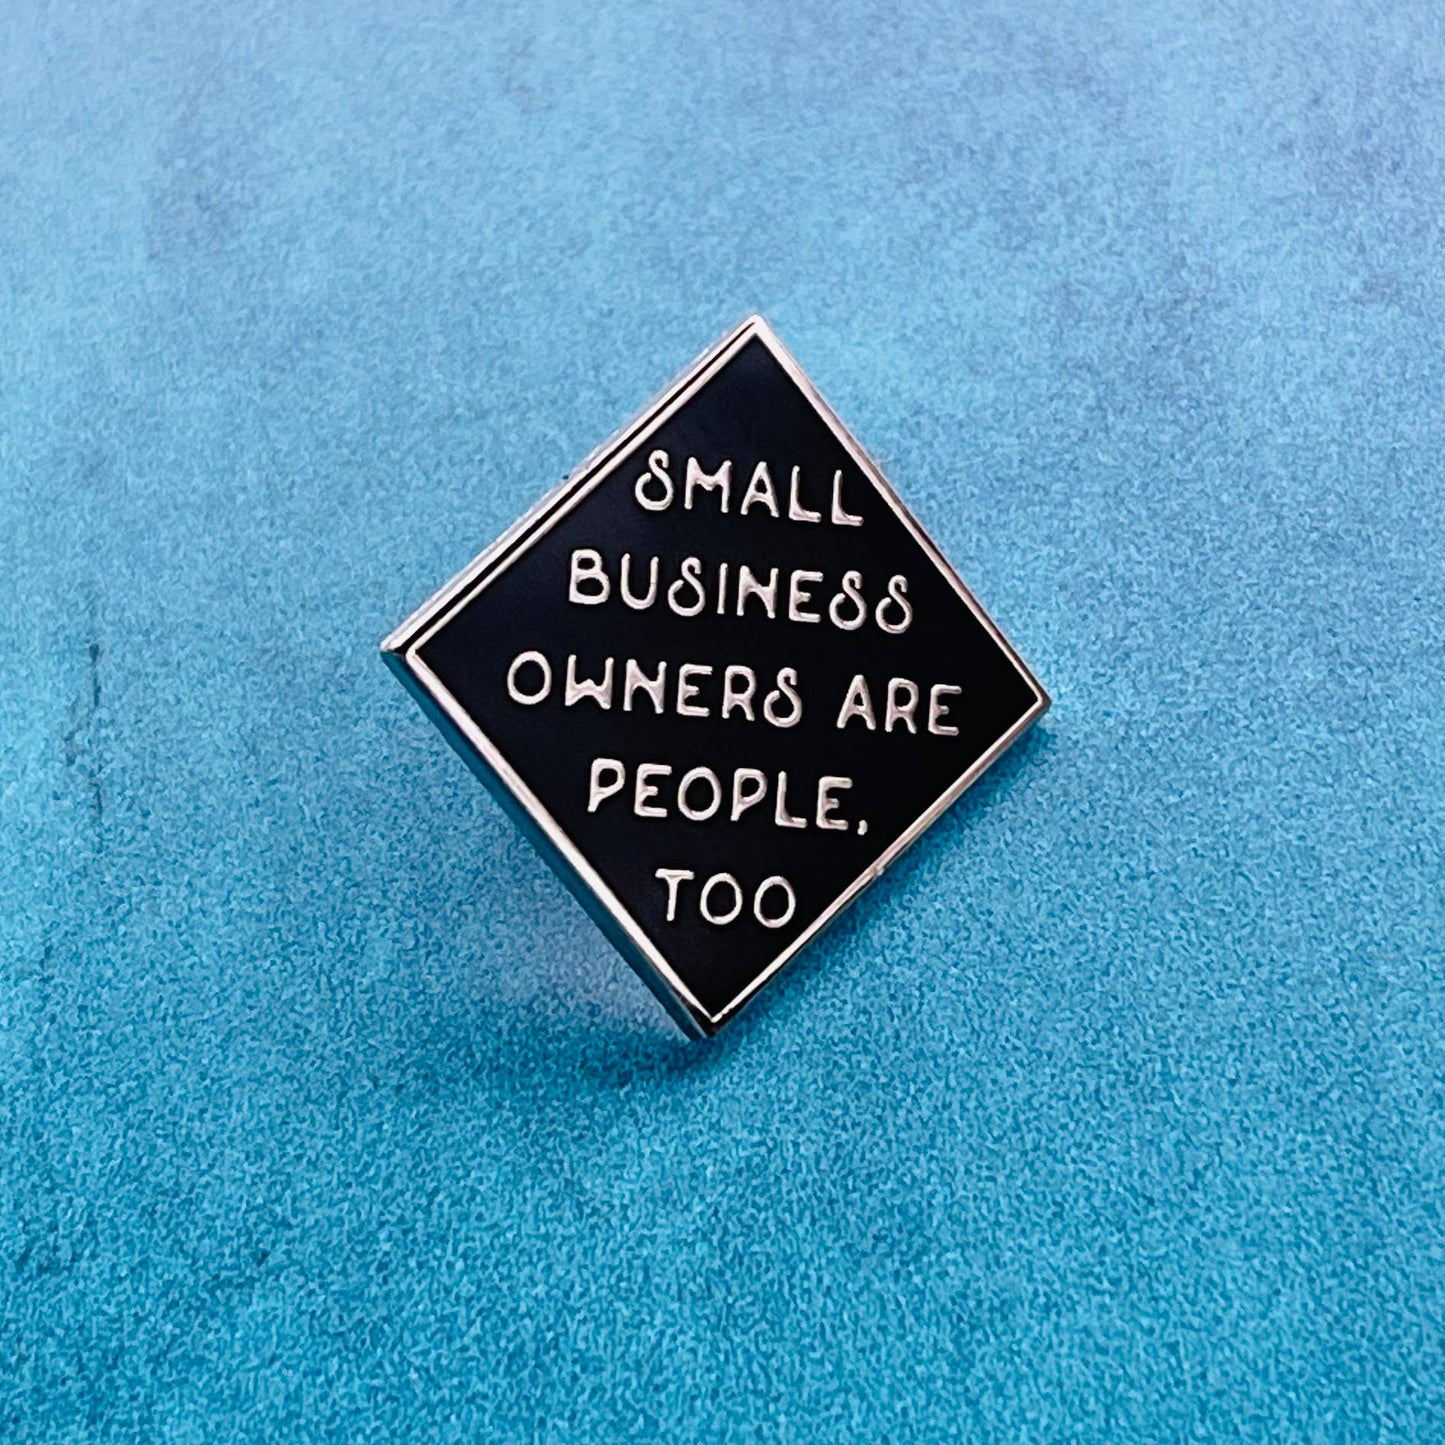 Small business owners are people too Enamel Lapel Pin small